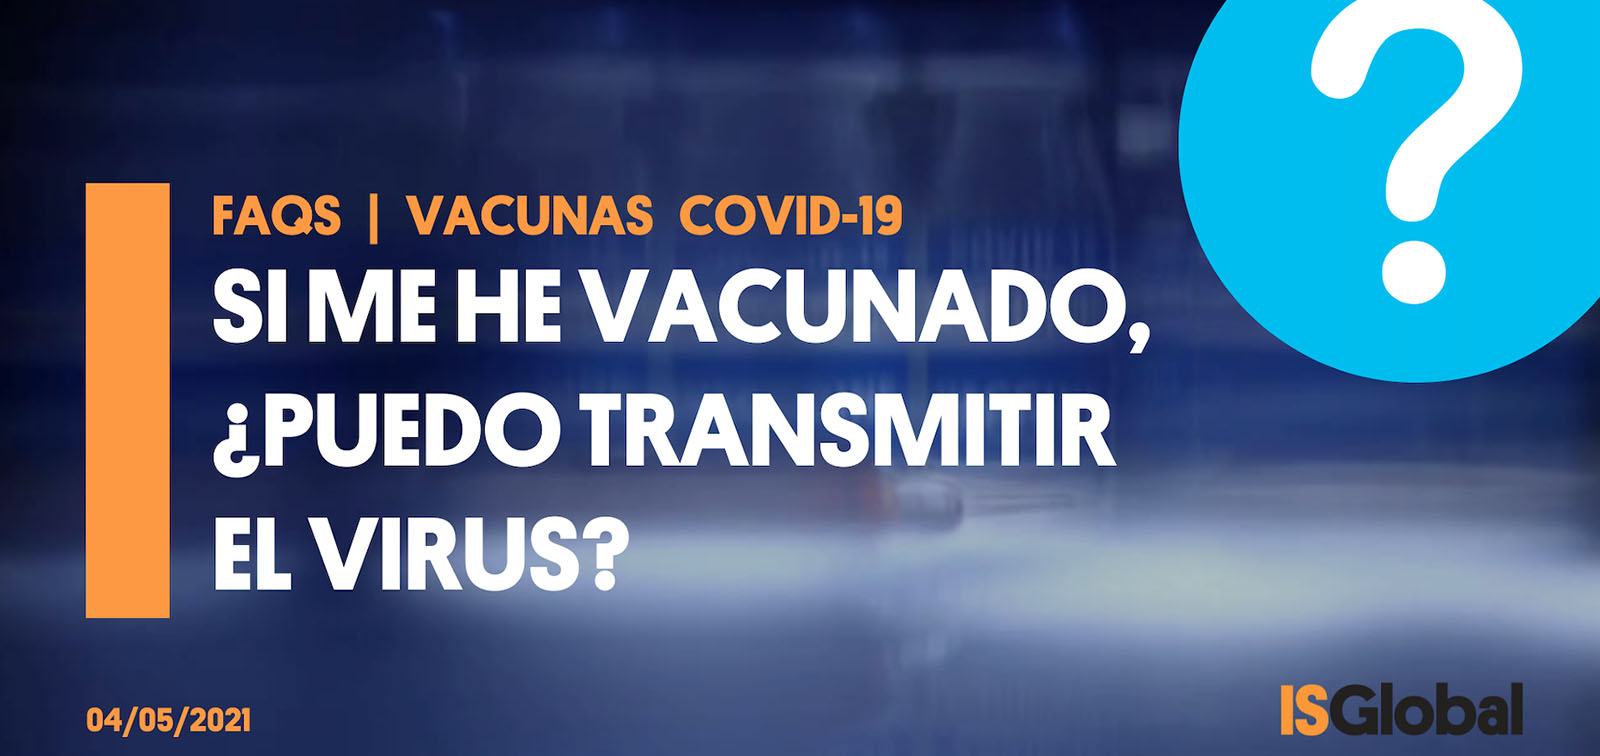 If I am vaccinated against COVID-19, can I transmit the coronavirus?